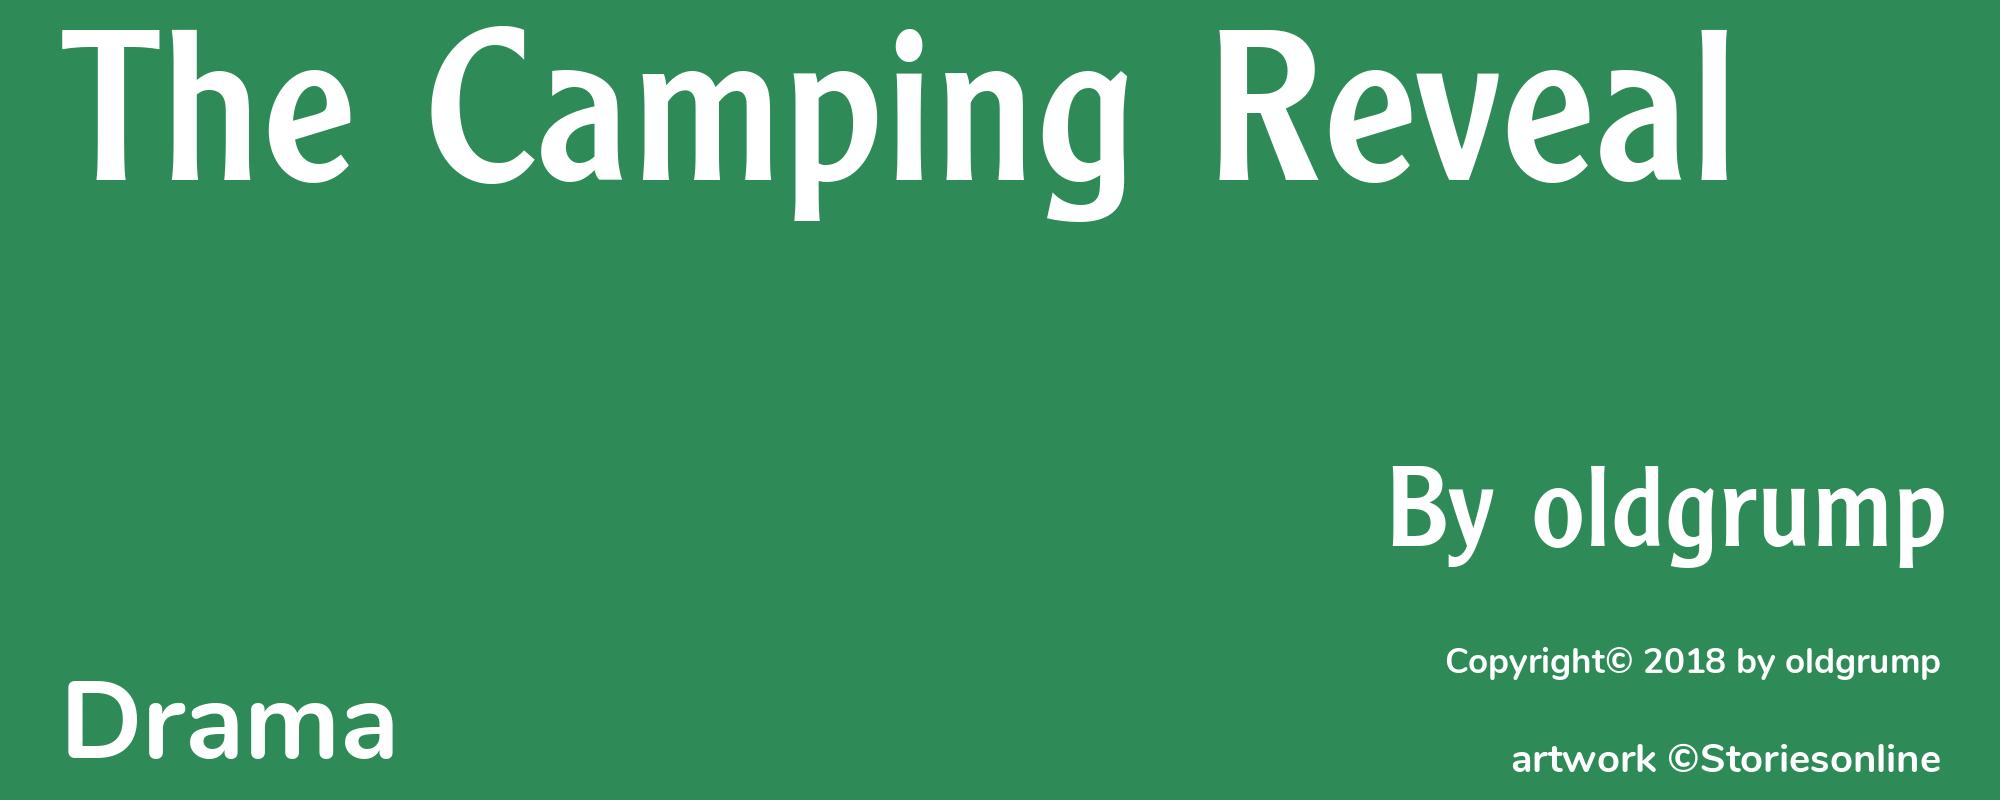 The Camping Reveal - Cover